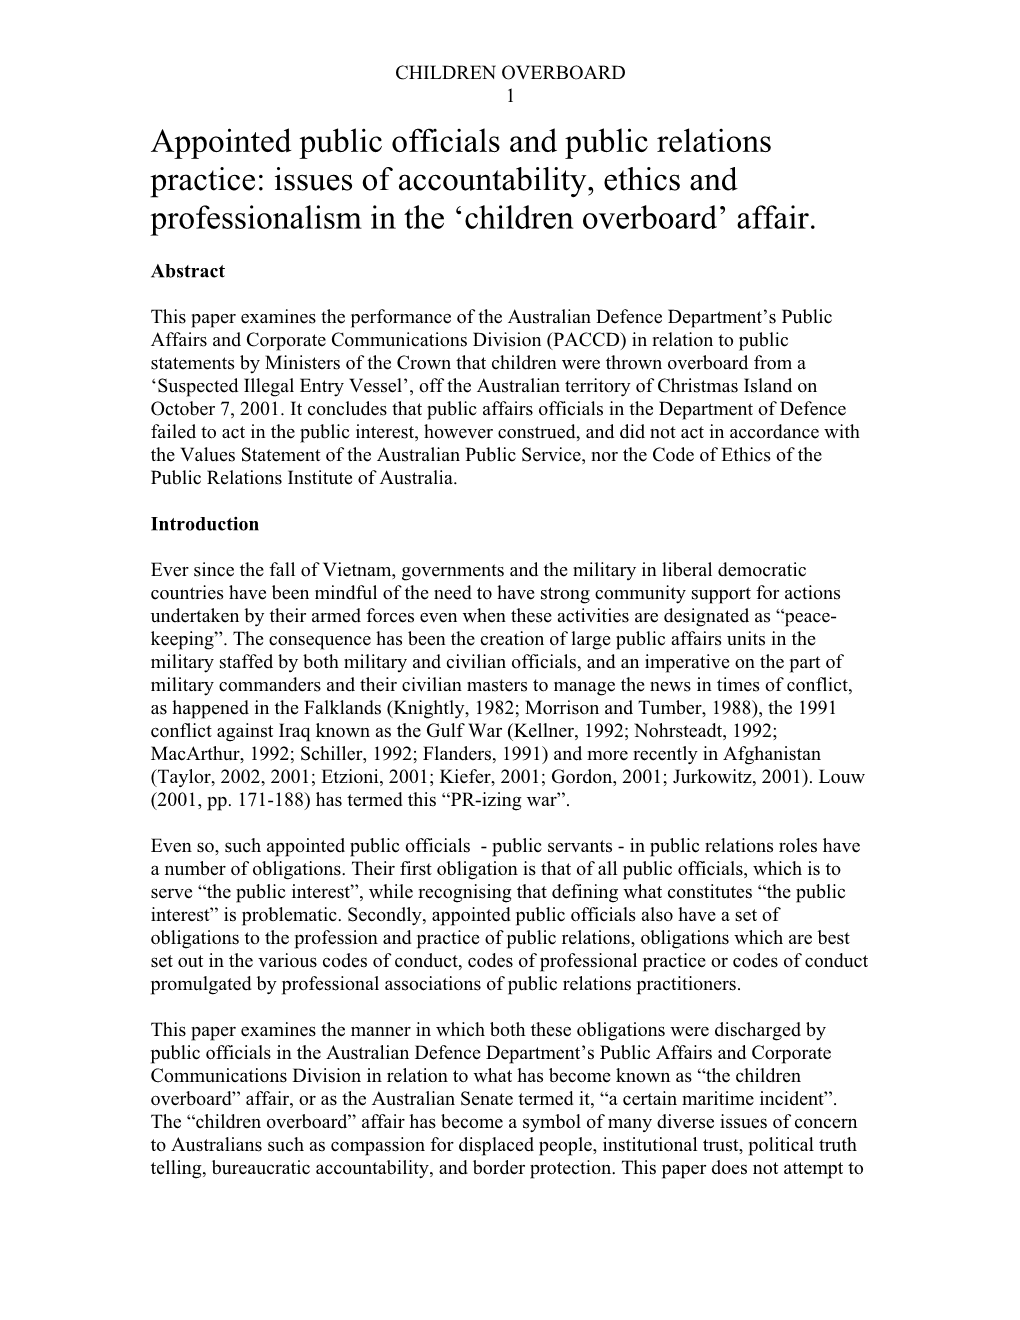 Appointed Public Officials and Public Relations Practice: Issues of Accountability, Ethics and Professionalism in the ‘Children Overboard’ Affair